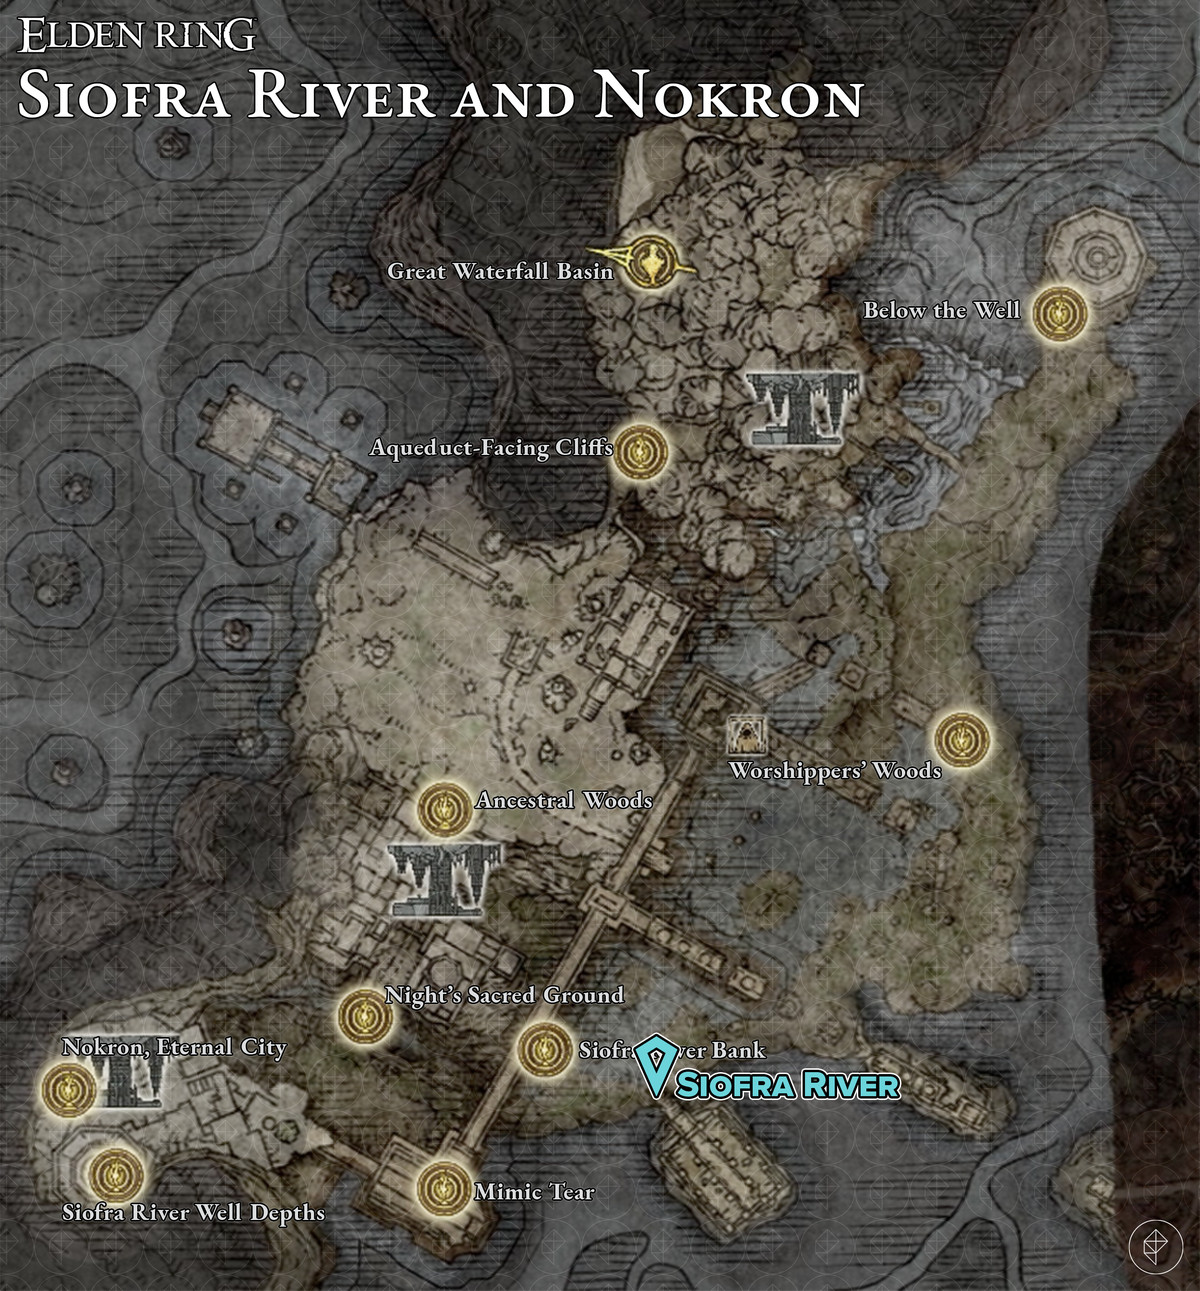 Map showing the Siofra River and Nokron, Eternal City map fragment stele location